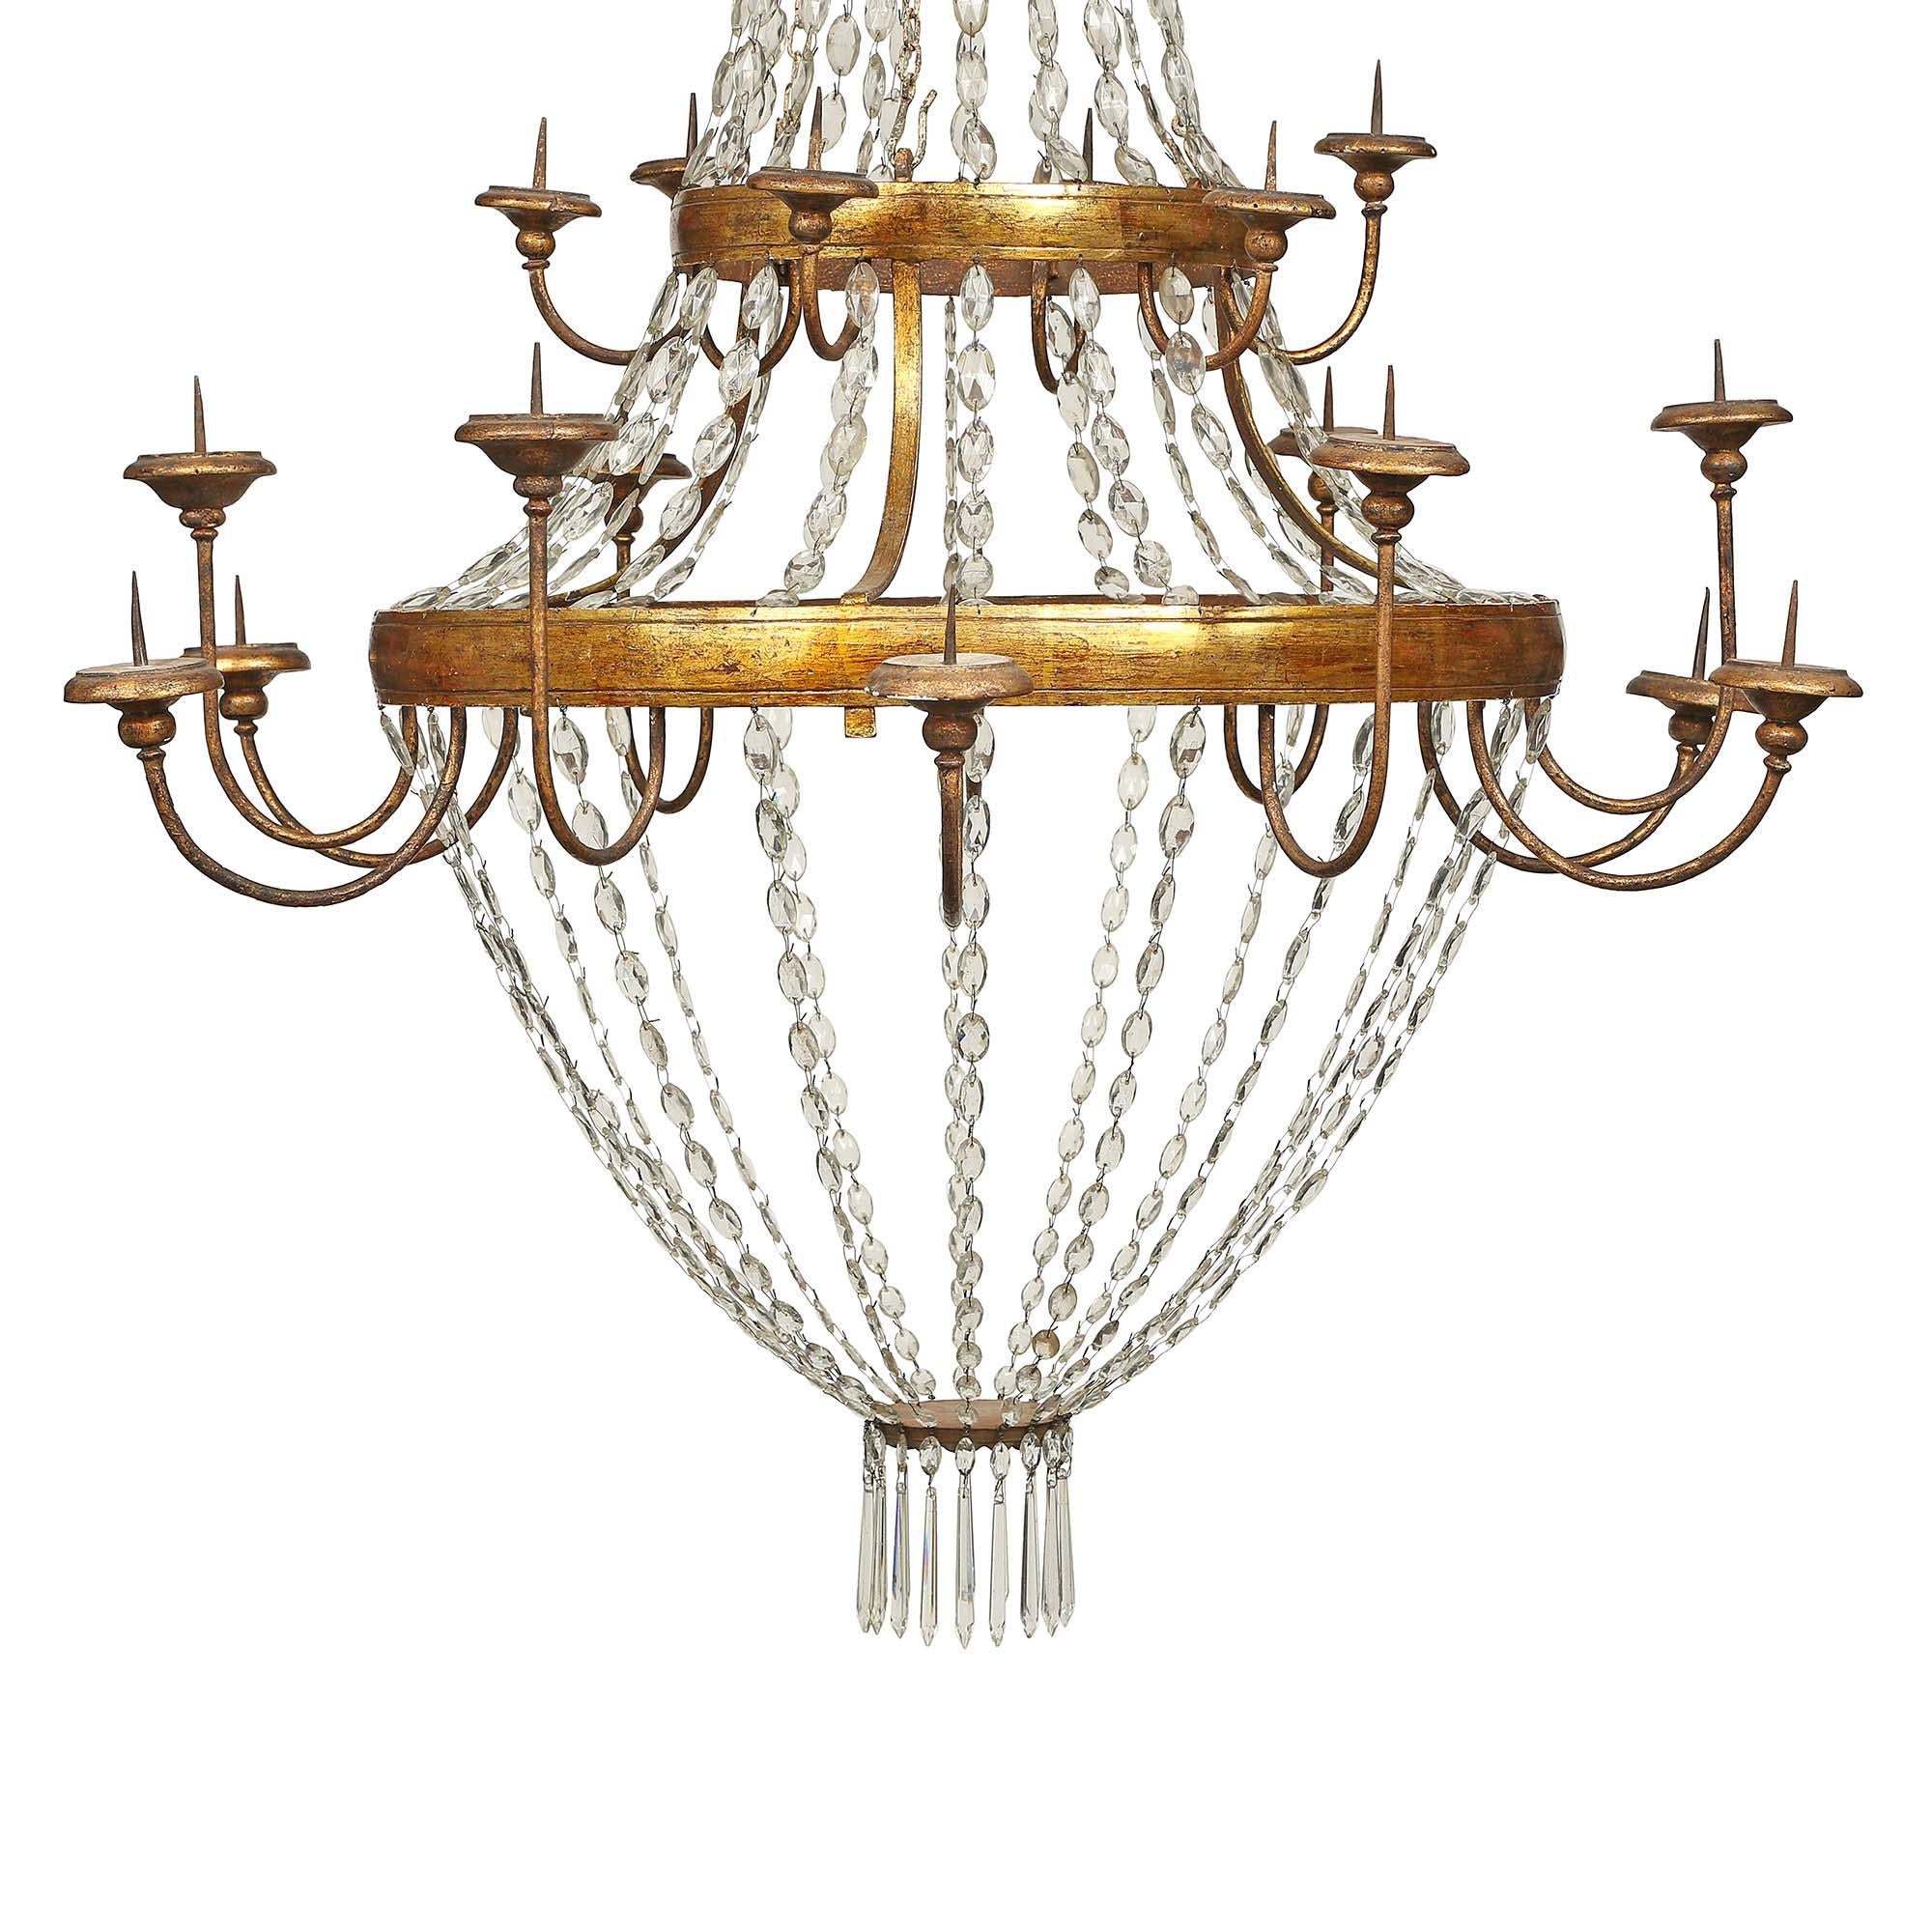 Italian 18th Century Gilt Metal, Gilt Wood And Patinated Wood Sixteen Light Chan In Good Condition For Sale In West Palm Beach, FL